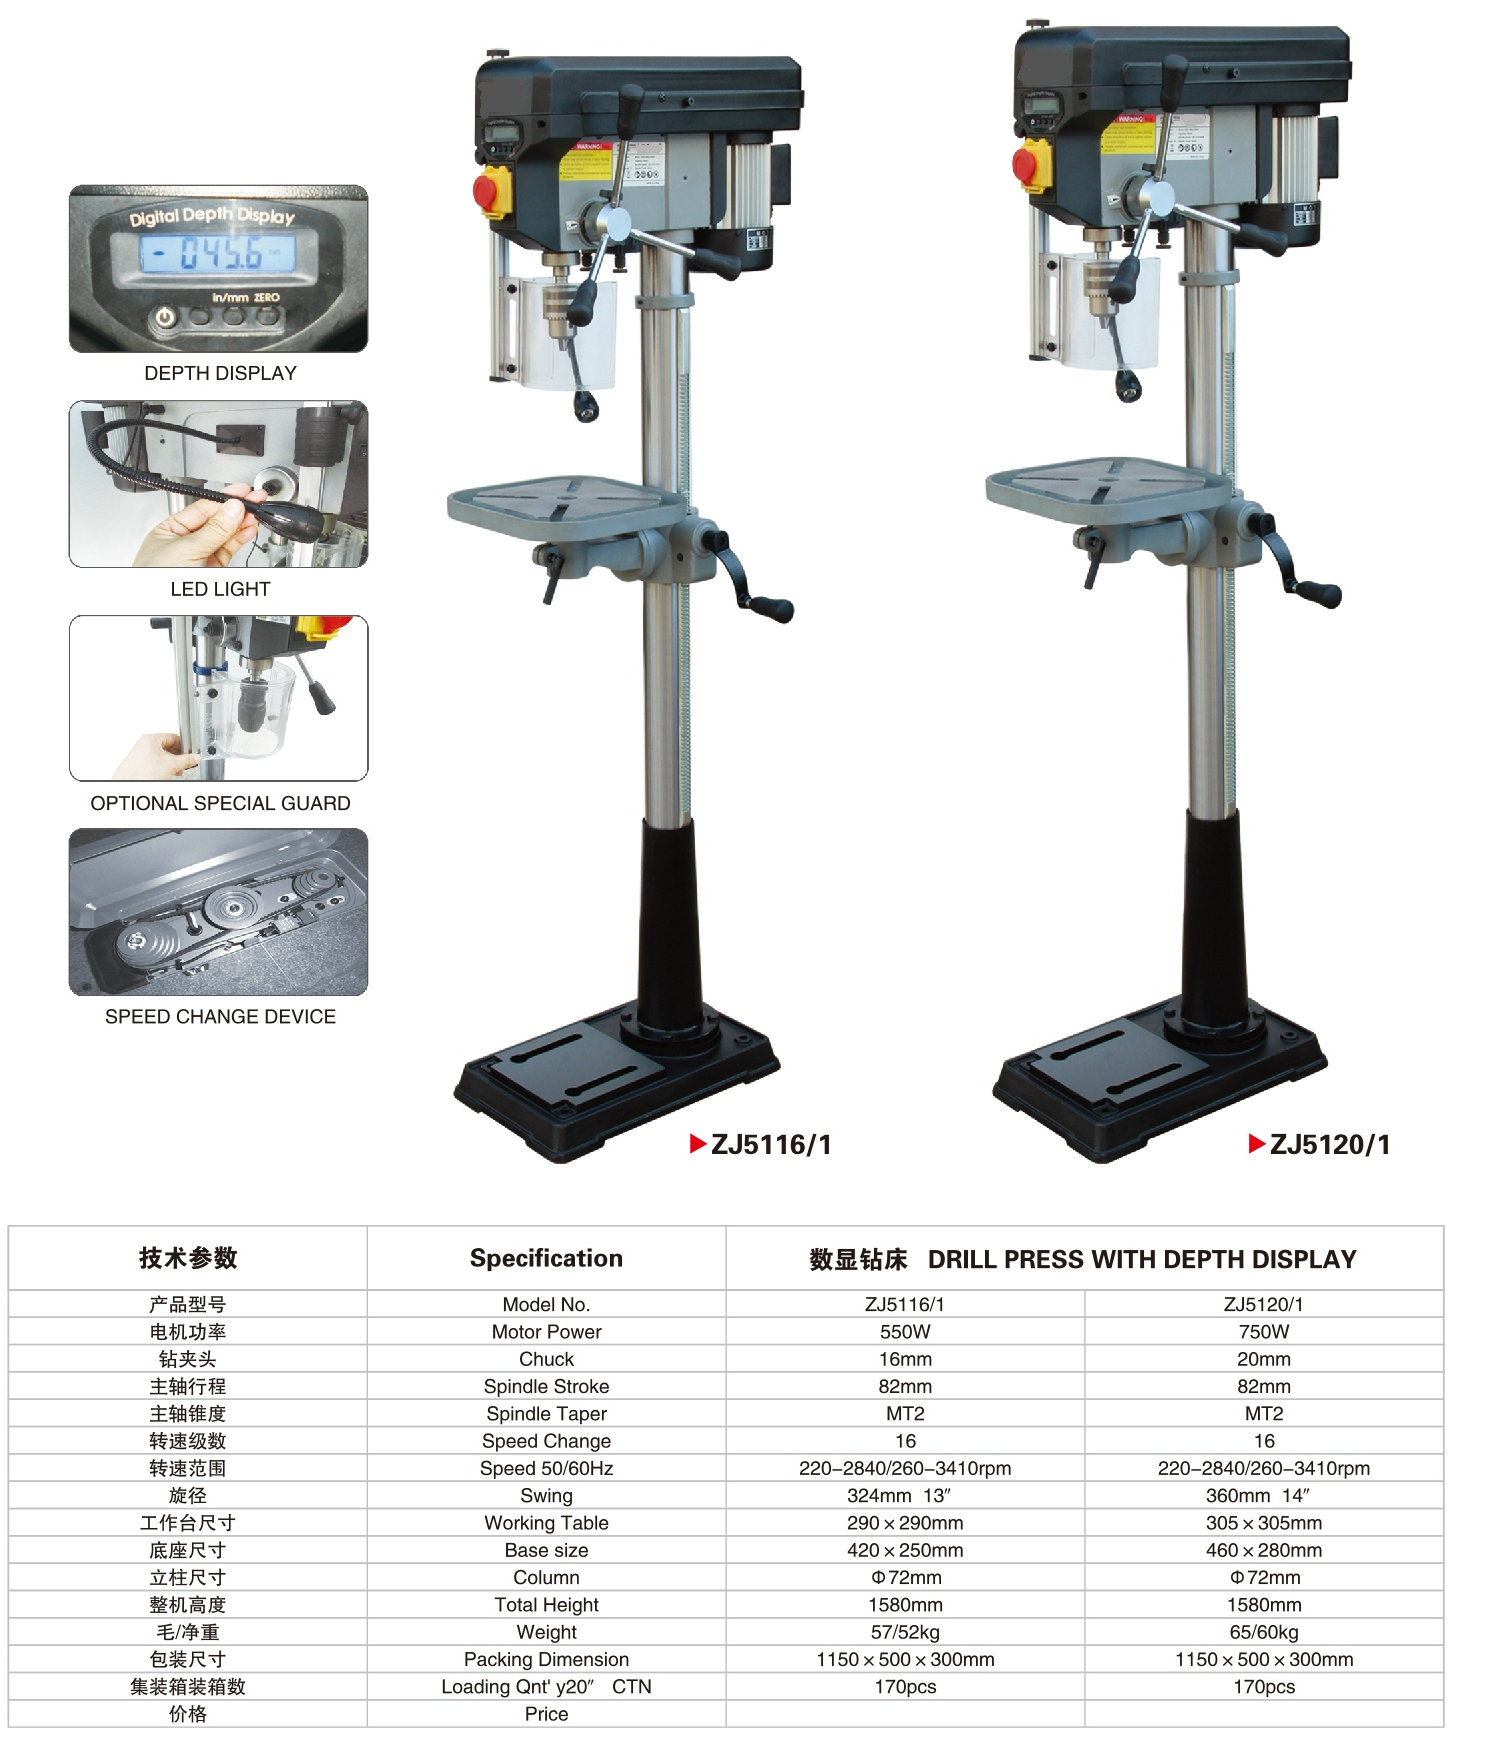 DRILL PRESS WITH DEPTH DISPLAY